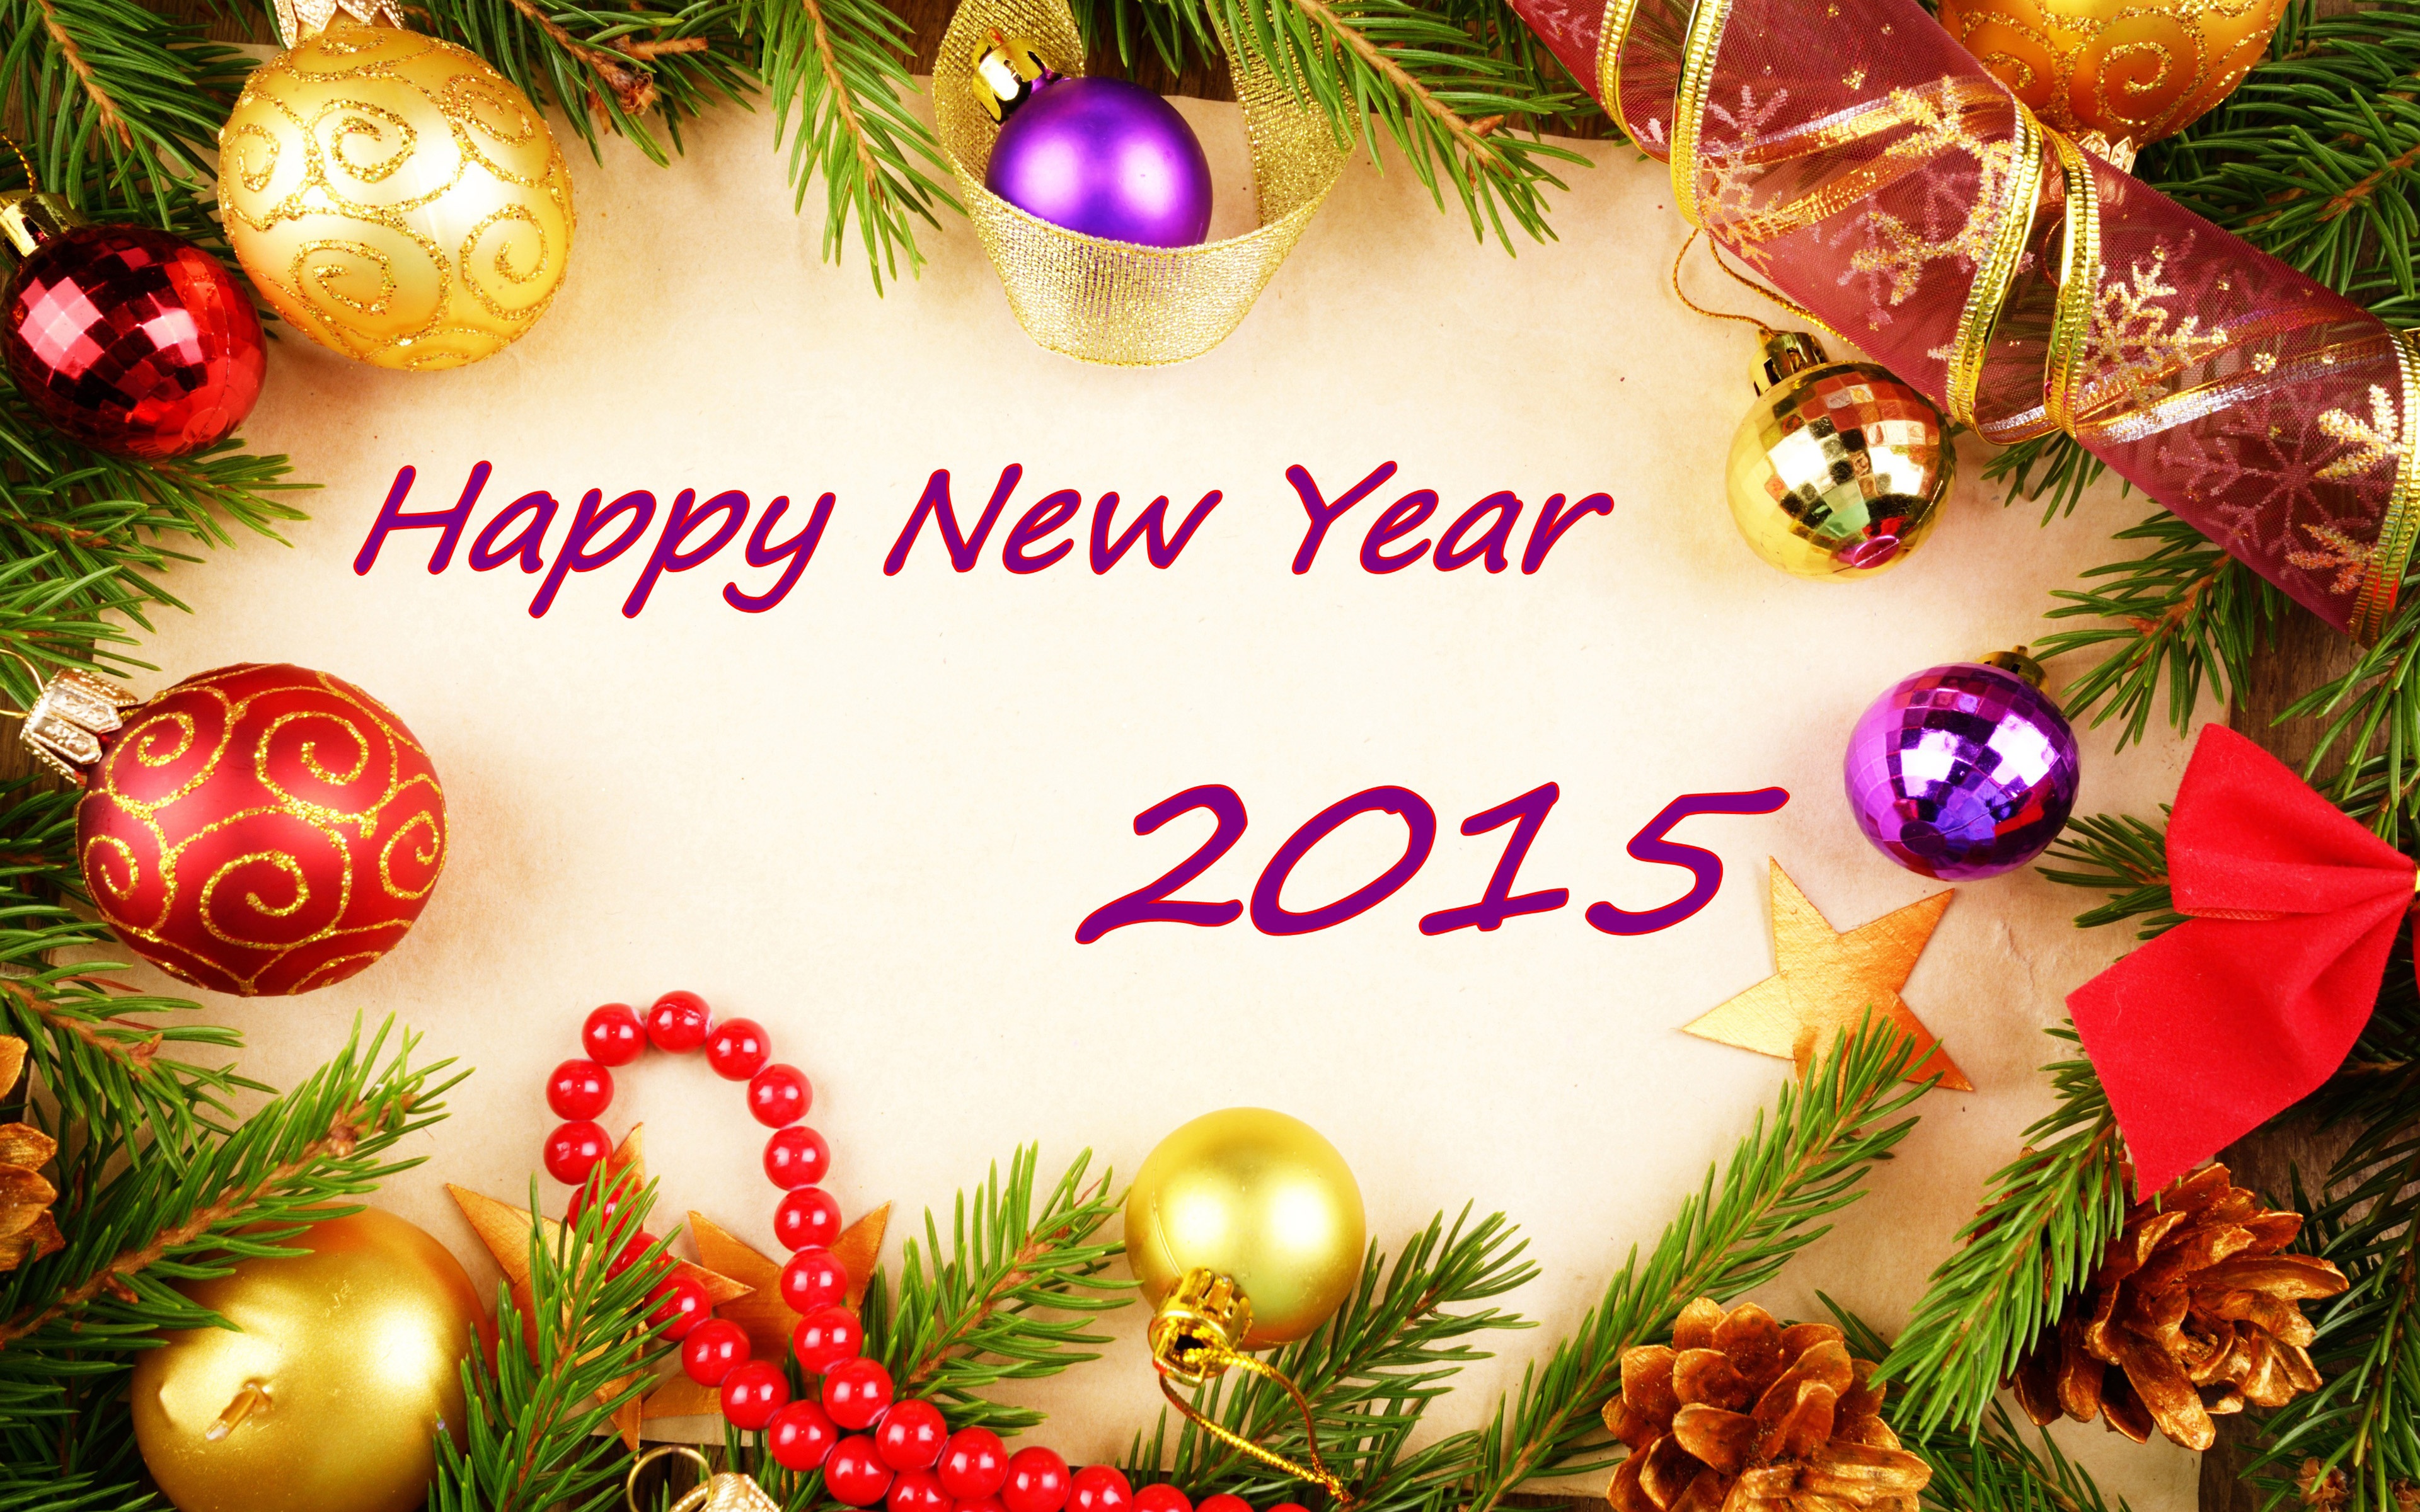 New Year Welcome 2015